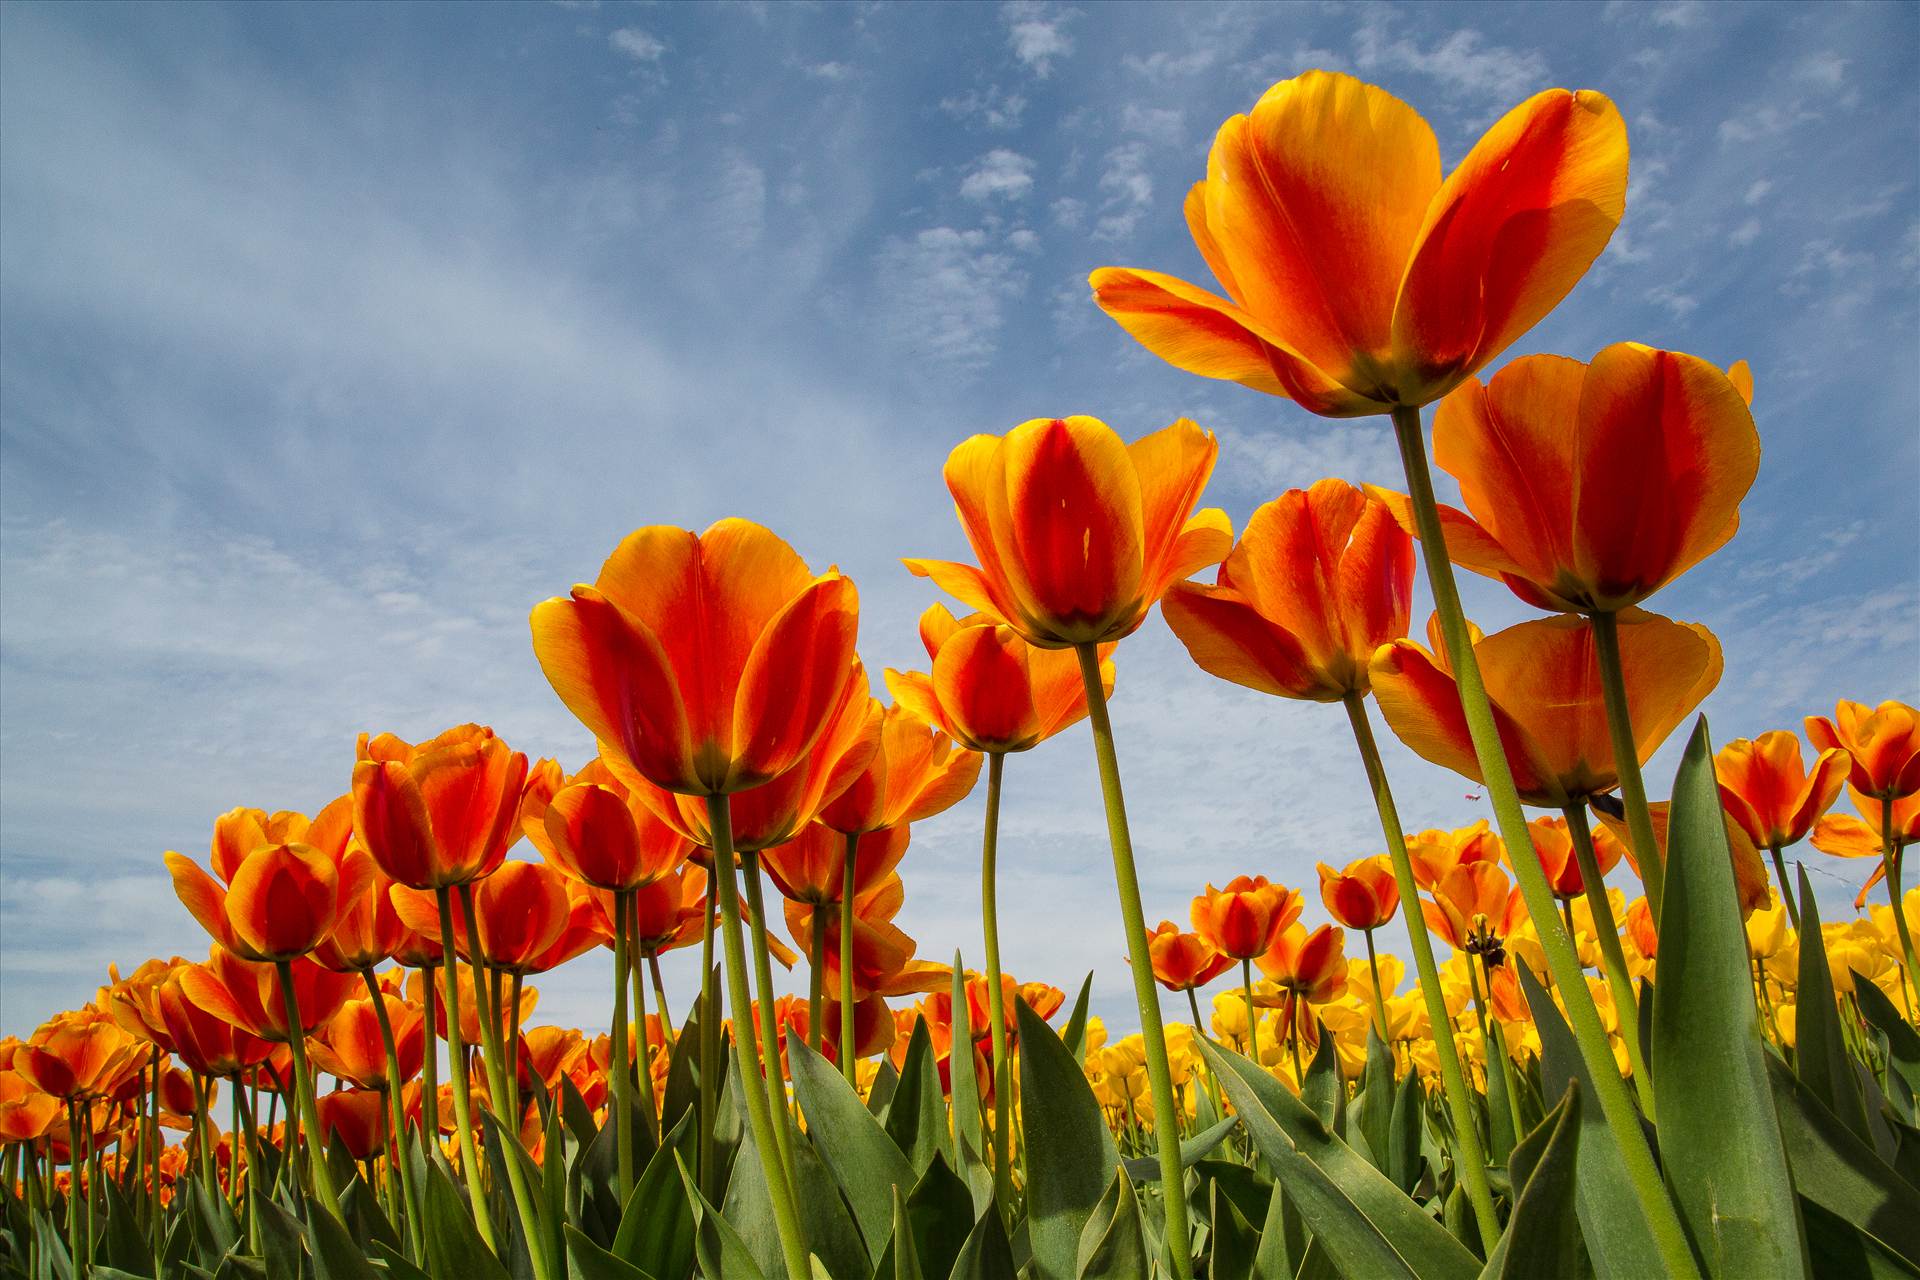 Tulip Festival - From the Skagit County Tulip Festival in Washington state. by Scott Smith Photos